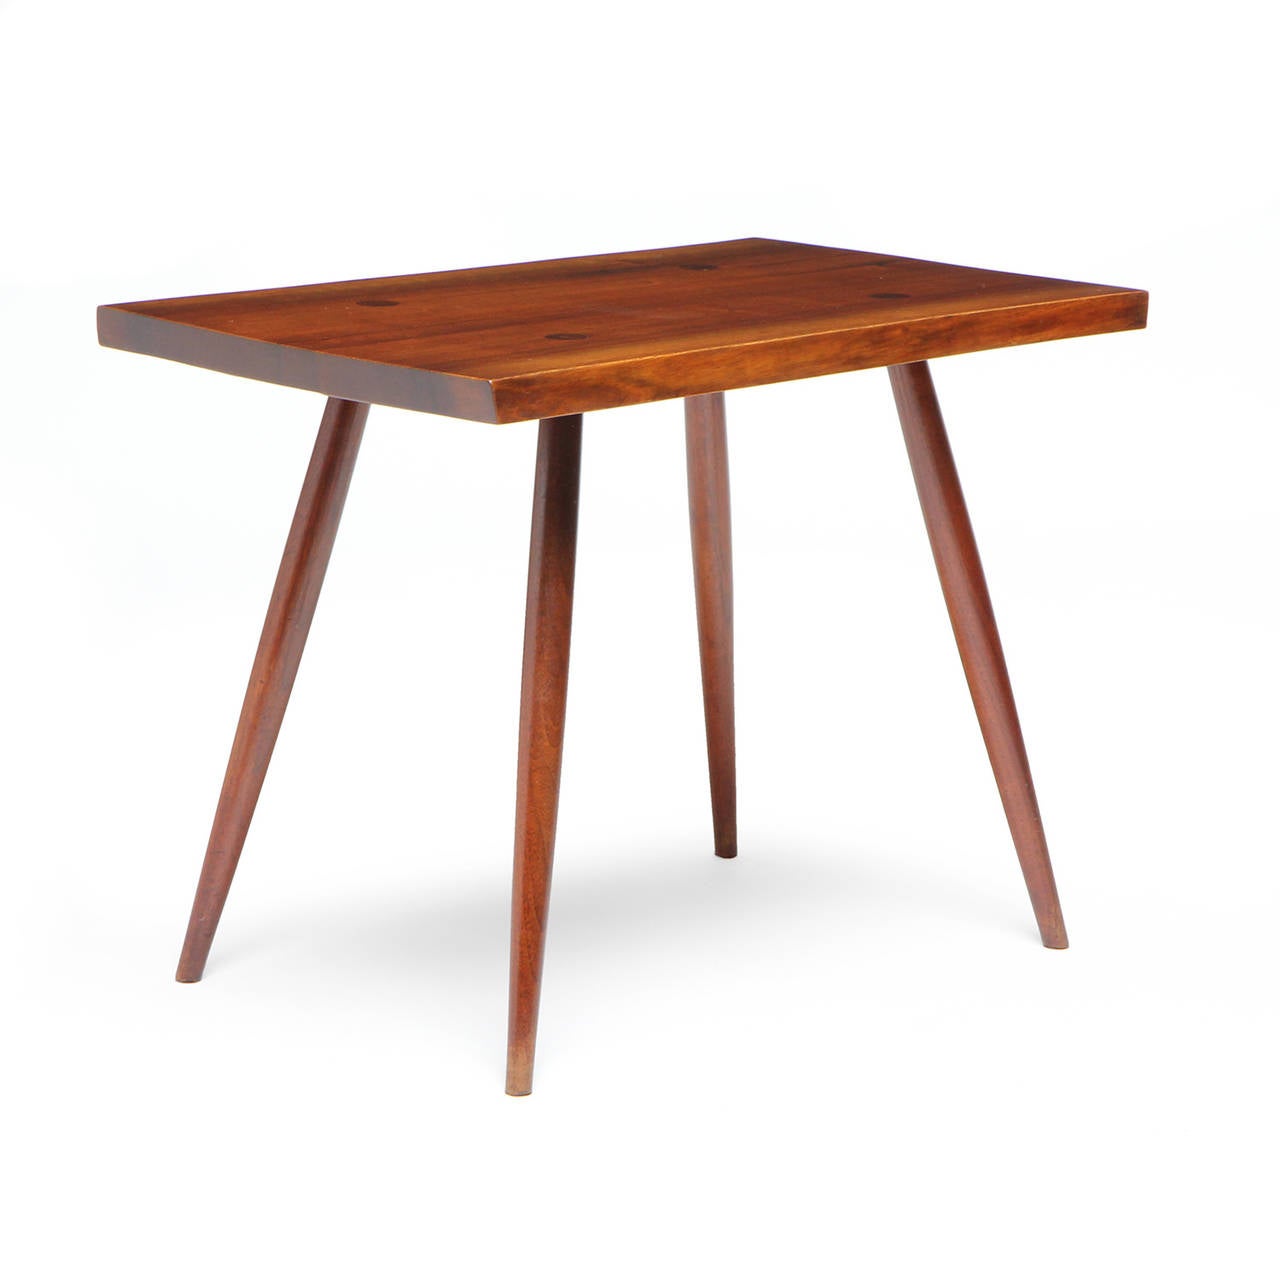 American Studio Made Side Table by George Nakashima